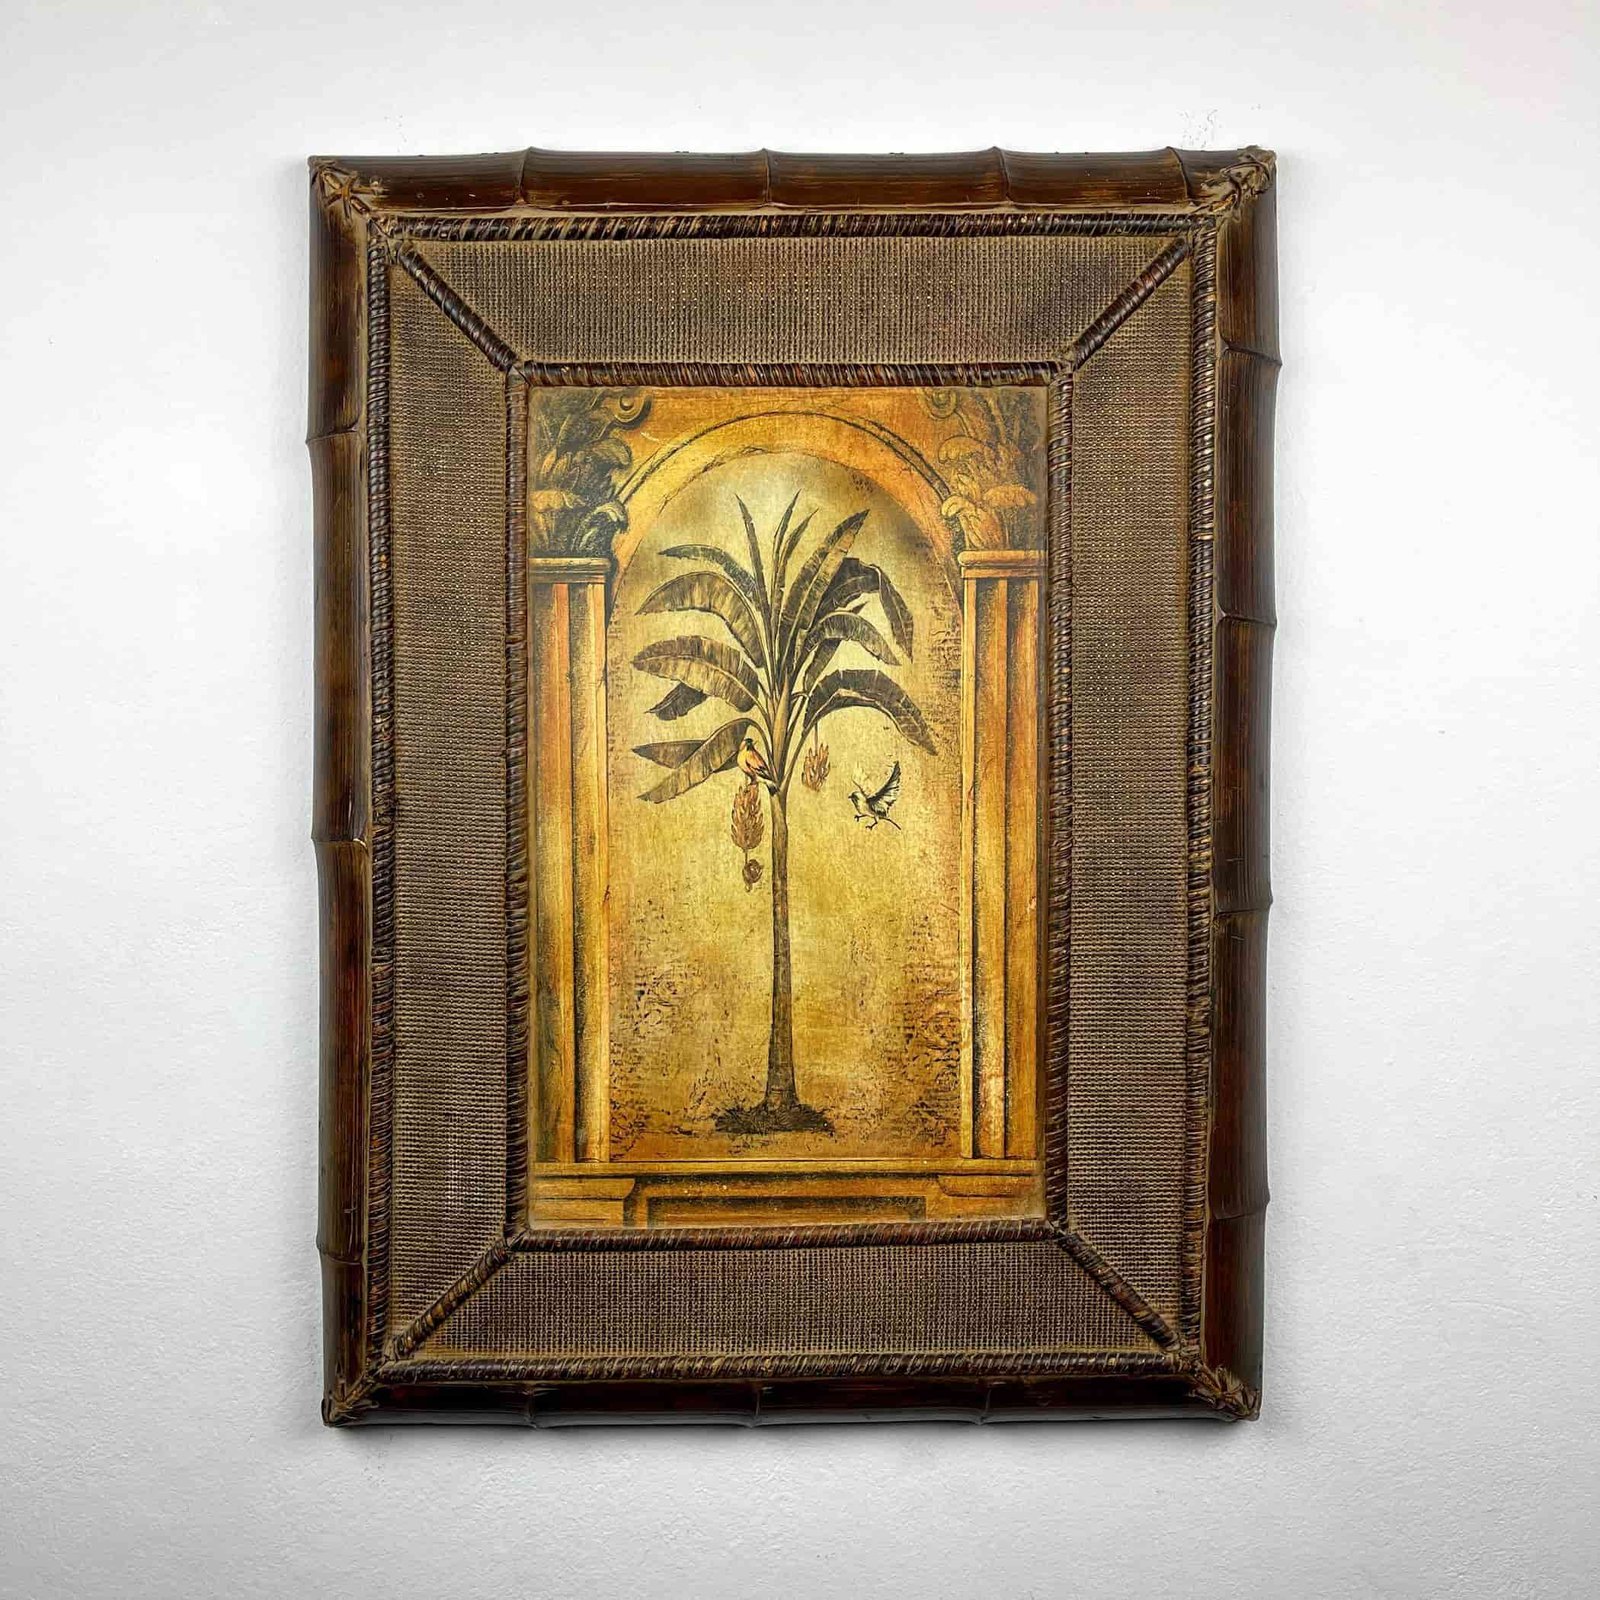 Vintage large wood bamboo decor panel 1950s retro wall decor colonial or tropical style